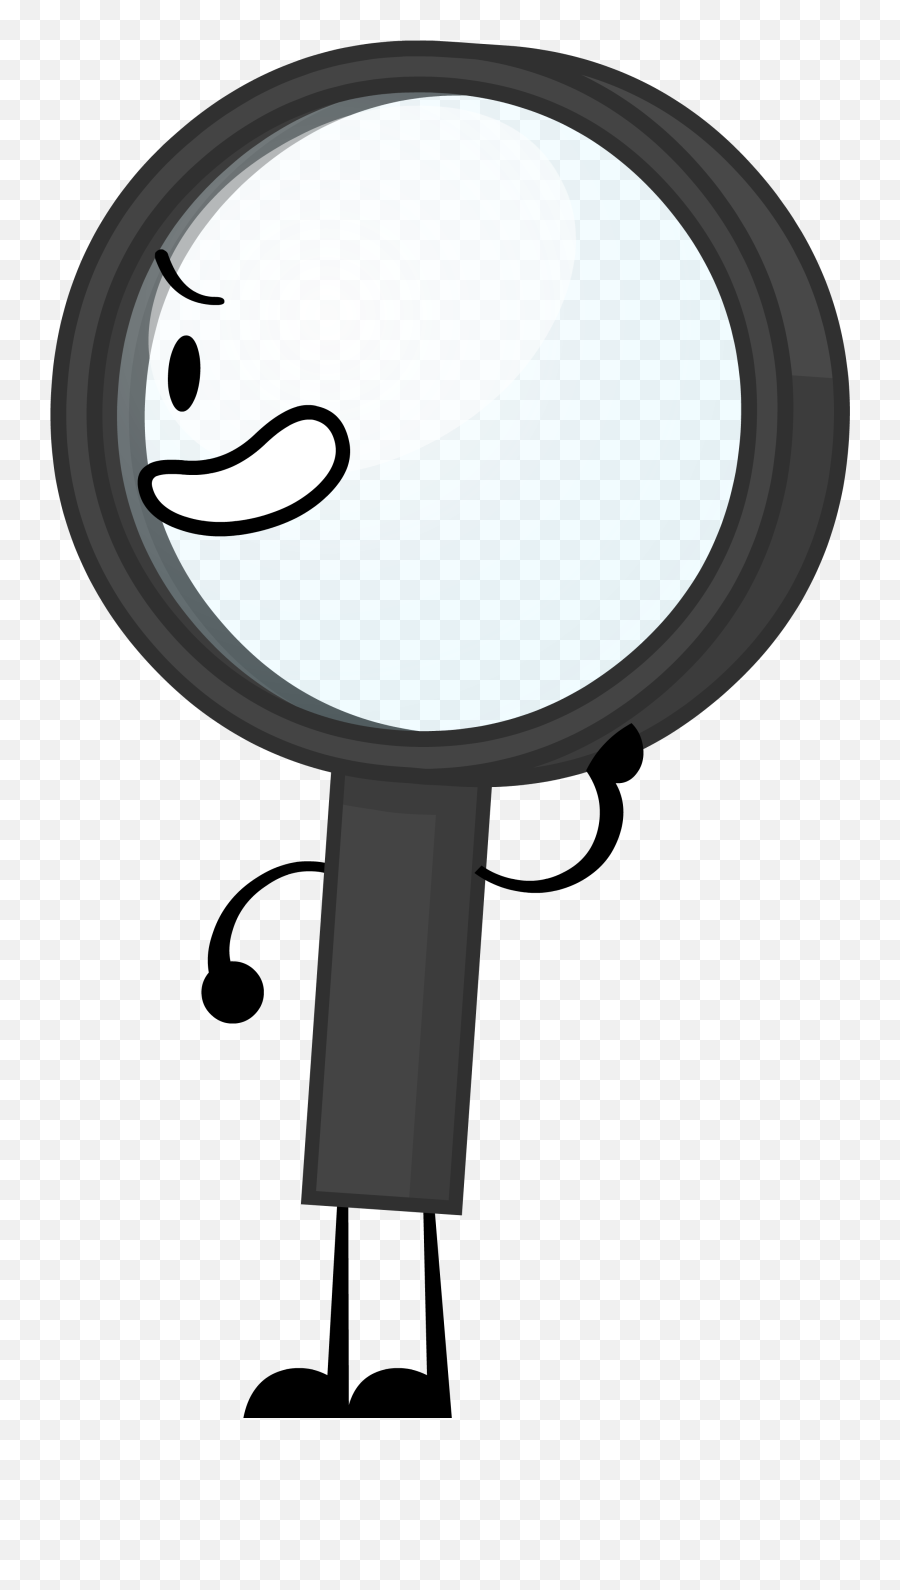 Picture Of A Magnifying Glass - Portable Network Graphics Inanimate Insanity Magnifying Glass Emoji,Magnifying Glass Emoji